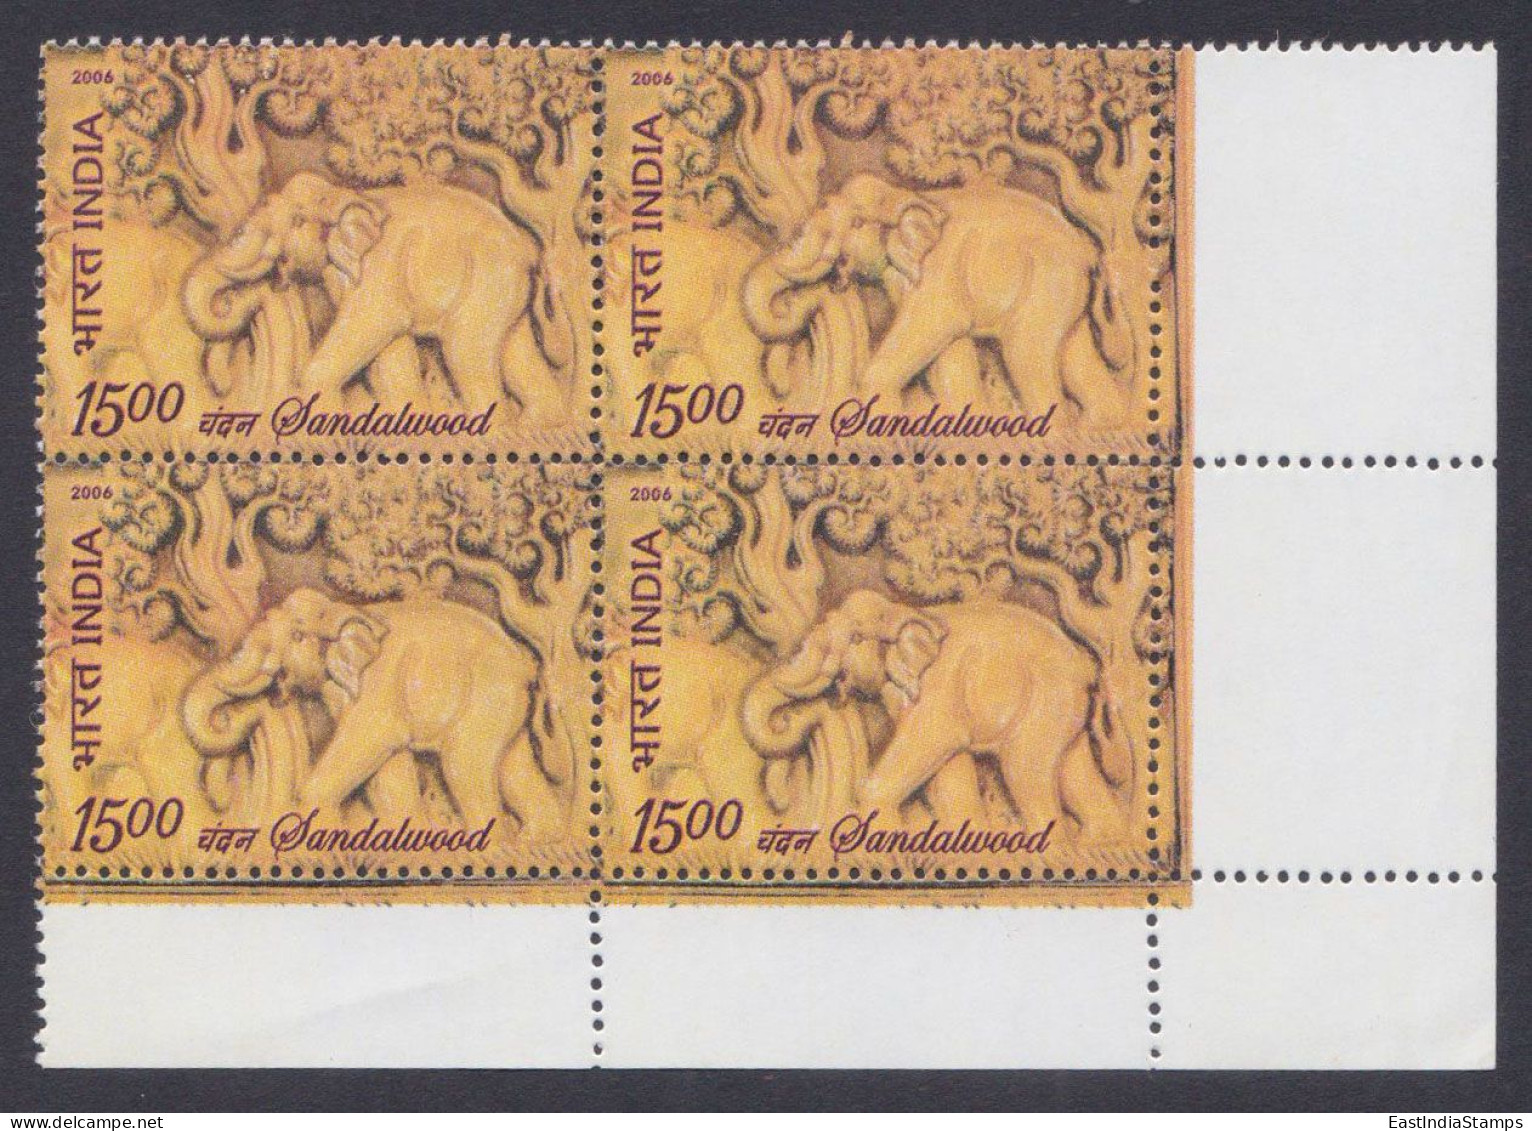 Inde India 2006 MNH Sandalwood, Scented Stamp, Elephant, Scupture, Scented Wood, Scent, Perfume, Block - Unused Stamps